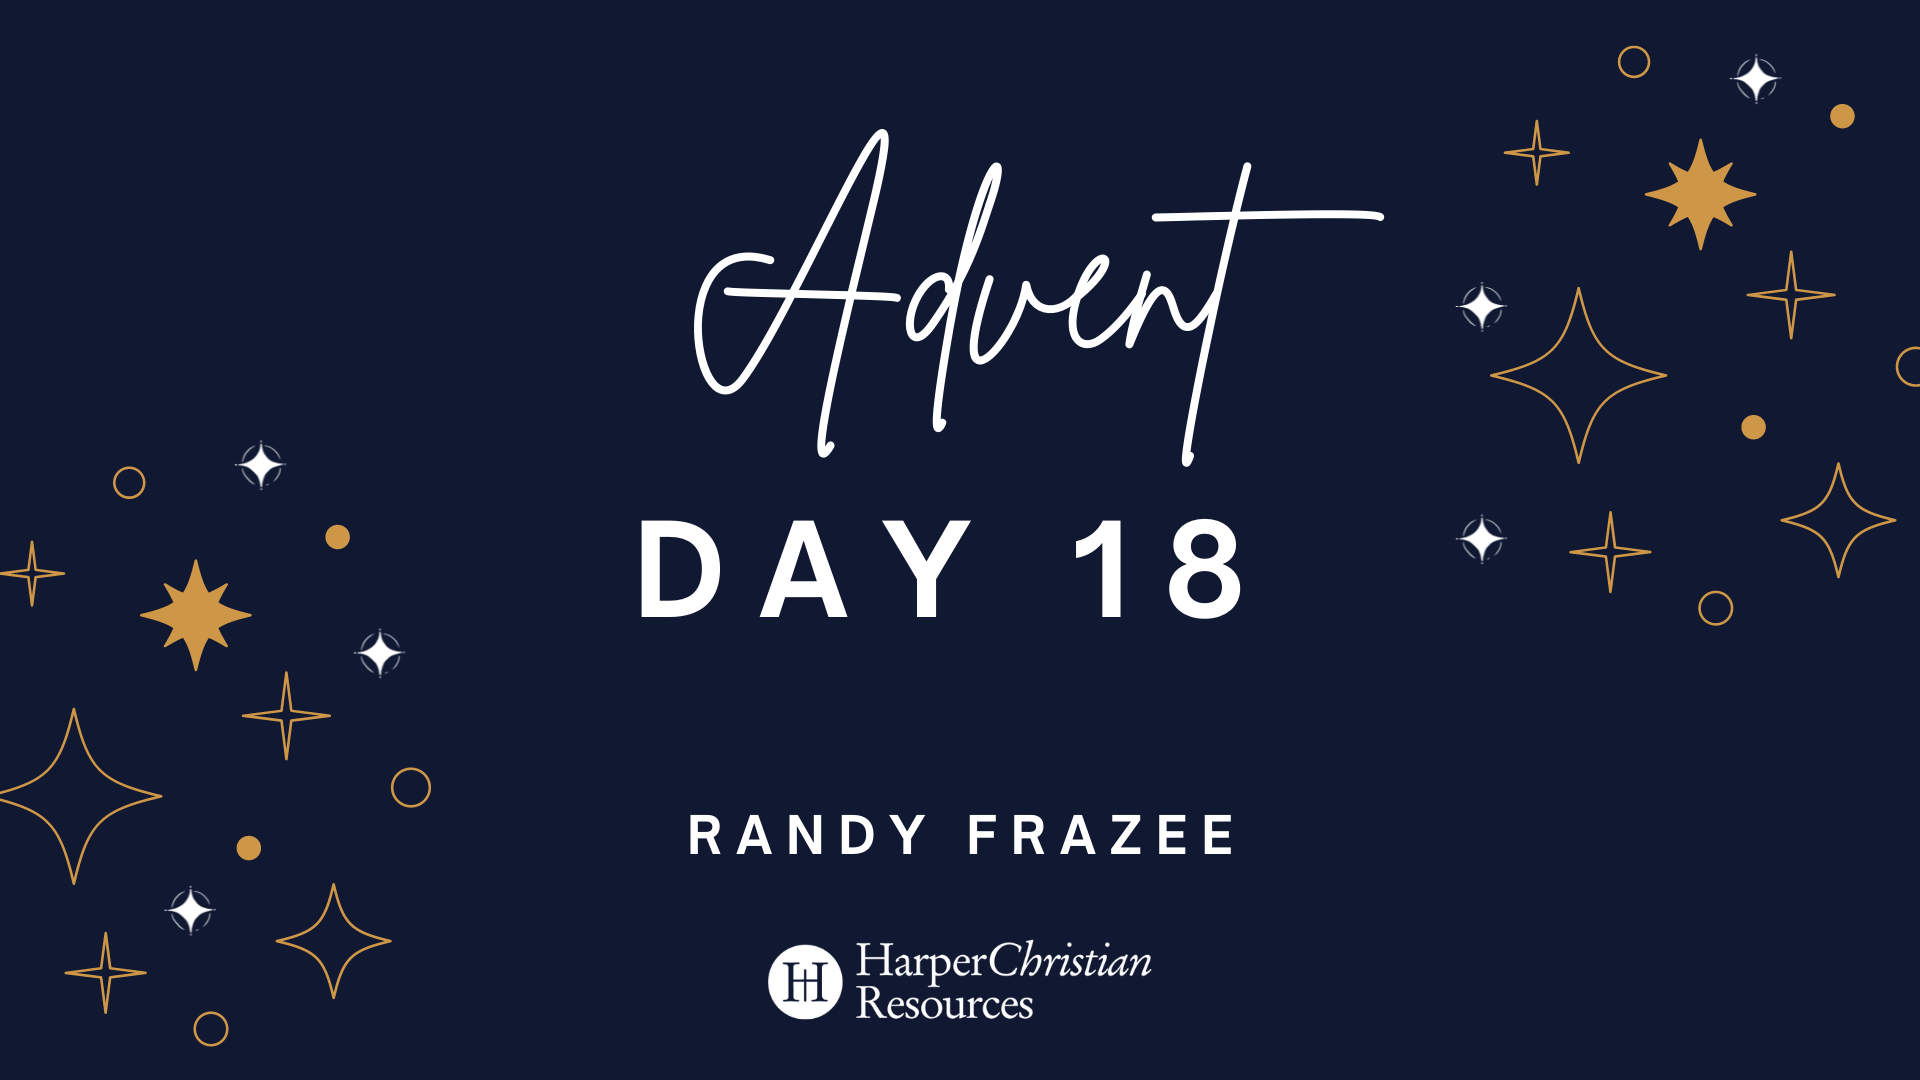 Advent Day 18: A message from Randy Frazee